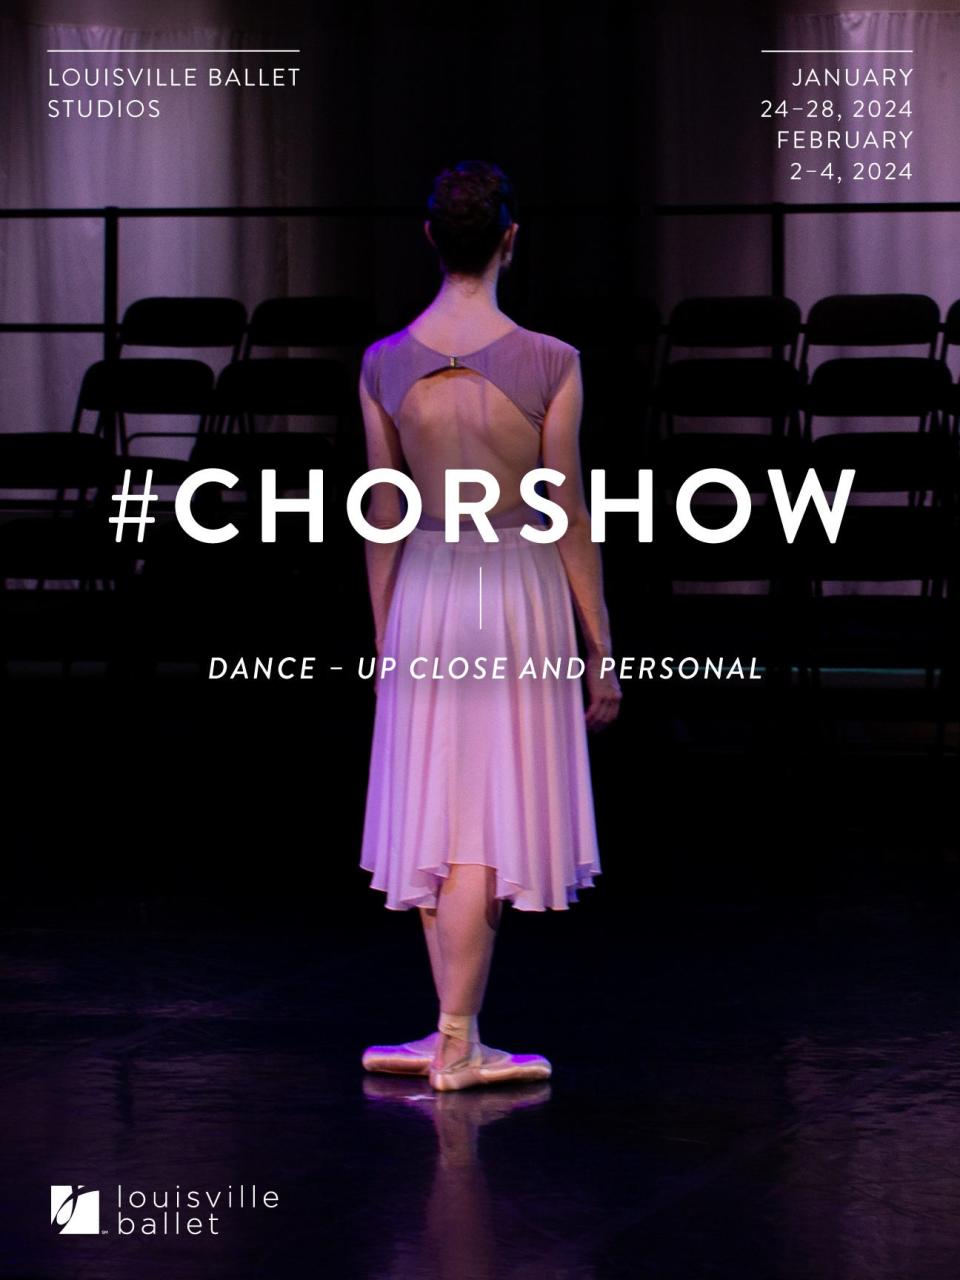 Enjoy this intimate community favorite production, including exciting new works made by and for the dancers of Louisville Ballet, performed live in our downtown studios.